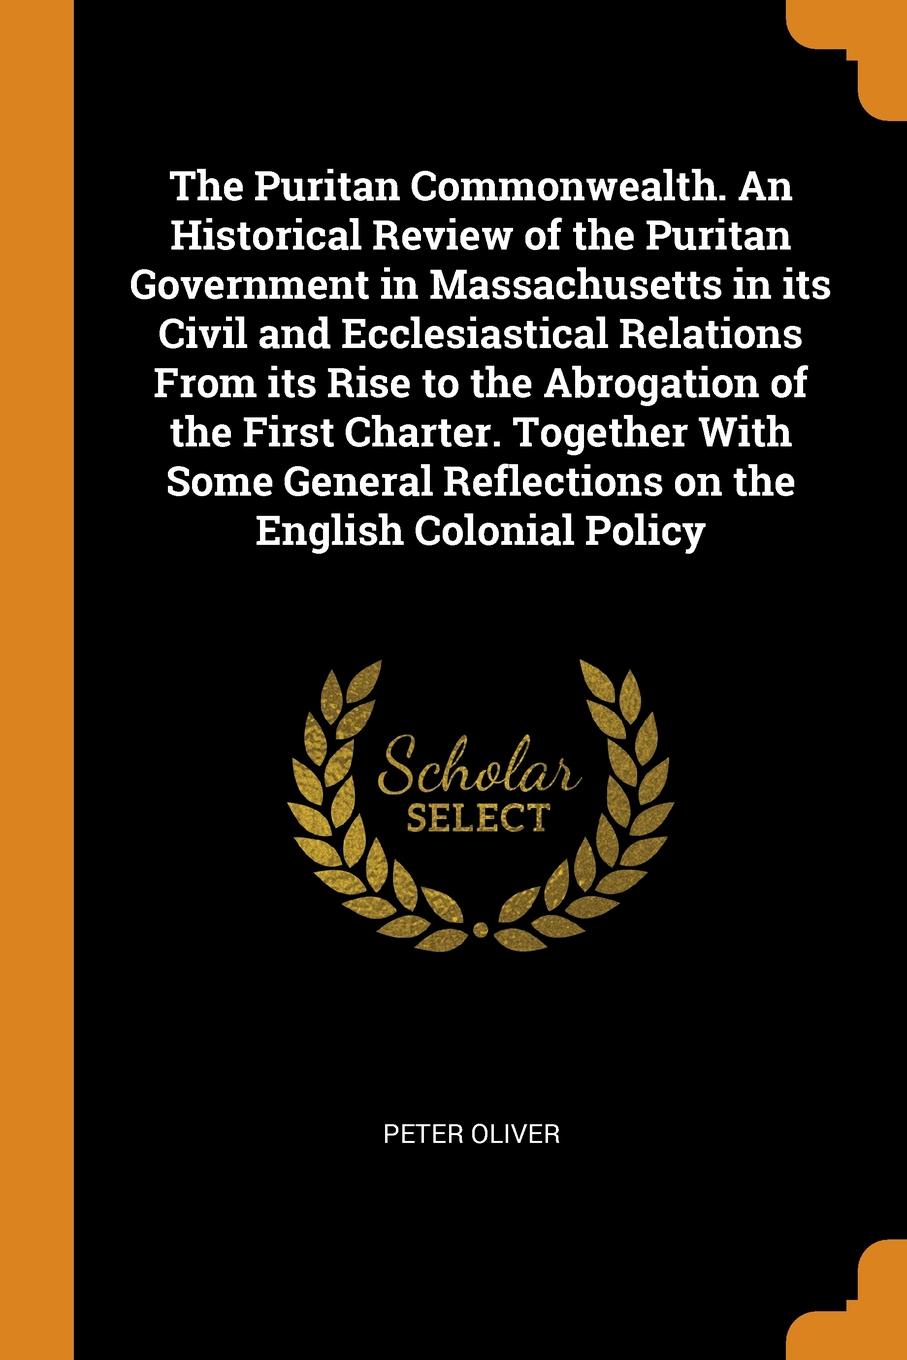 The Puritan Commonwealth. An Historical Review of the Puritan Government in Massachusetts in its Civil and Ecclesiastical Relations From its Rise to the Abrogation of the First Charter. Together With Some General Reflections on the English Colonia...